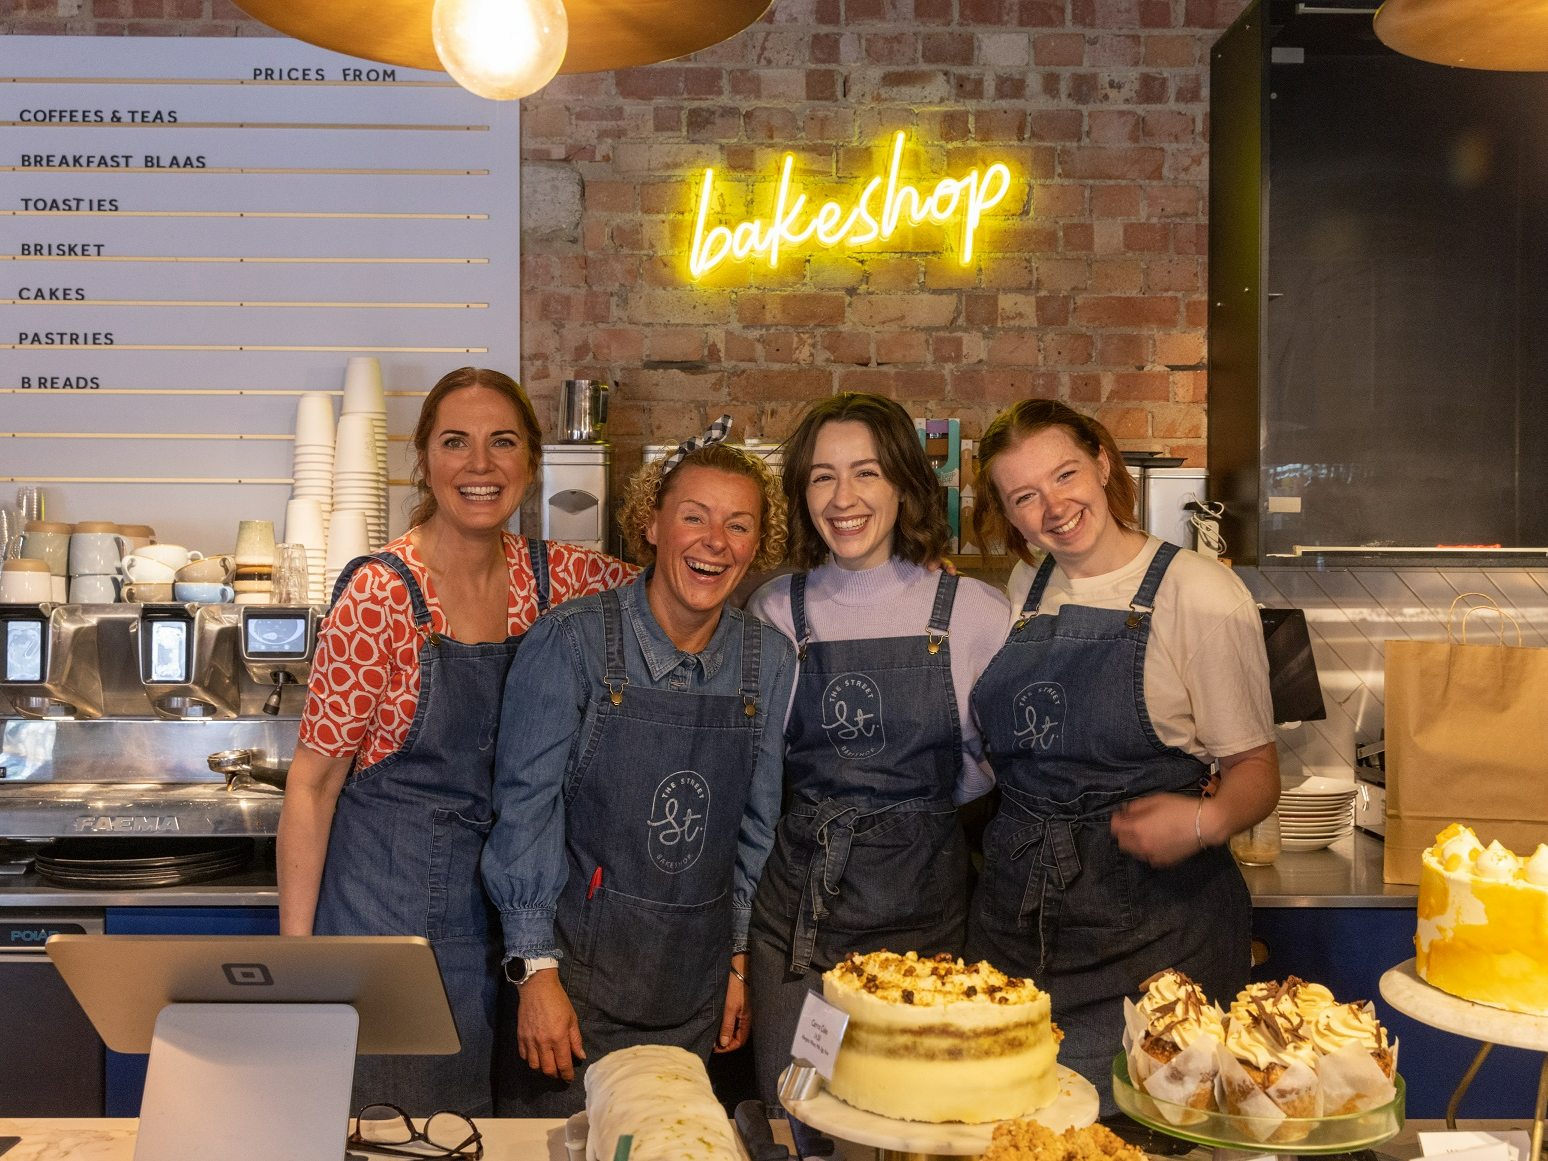 Three females wearing aprons stand together behind a counter of cakes.